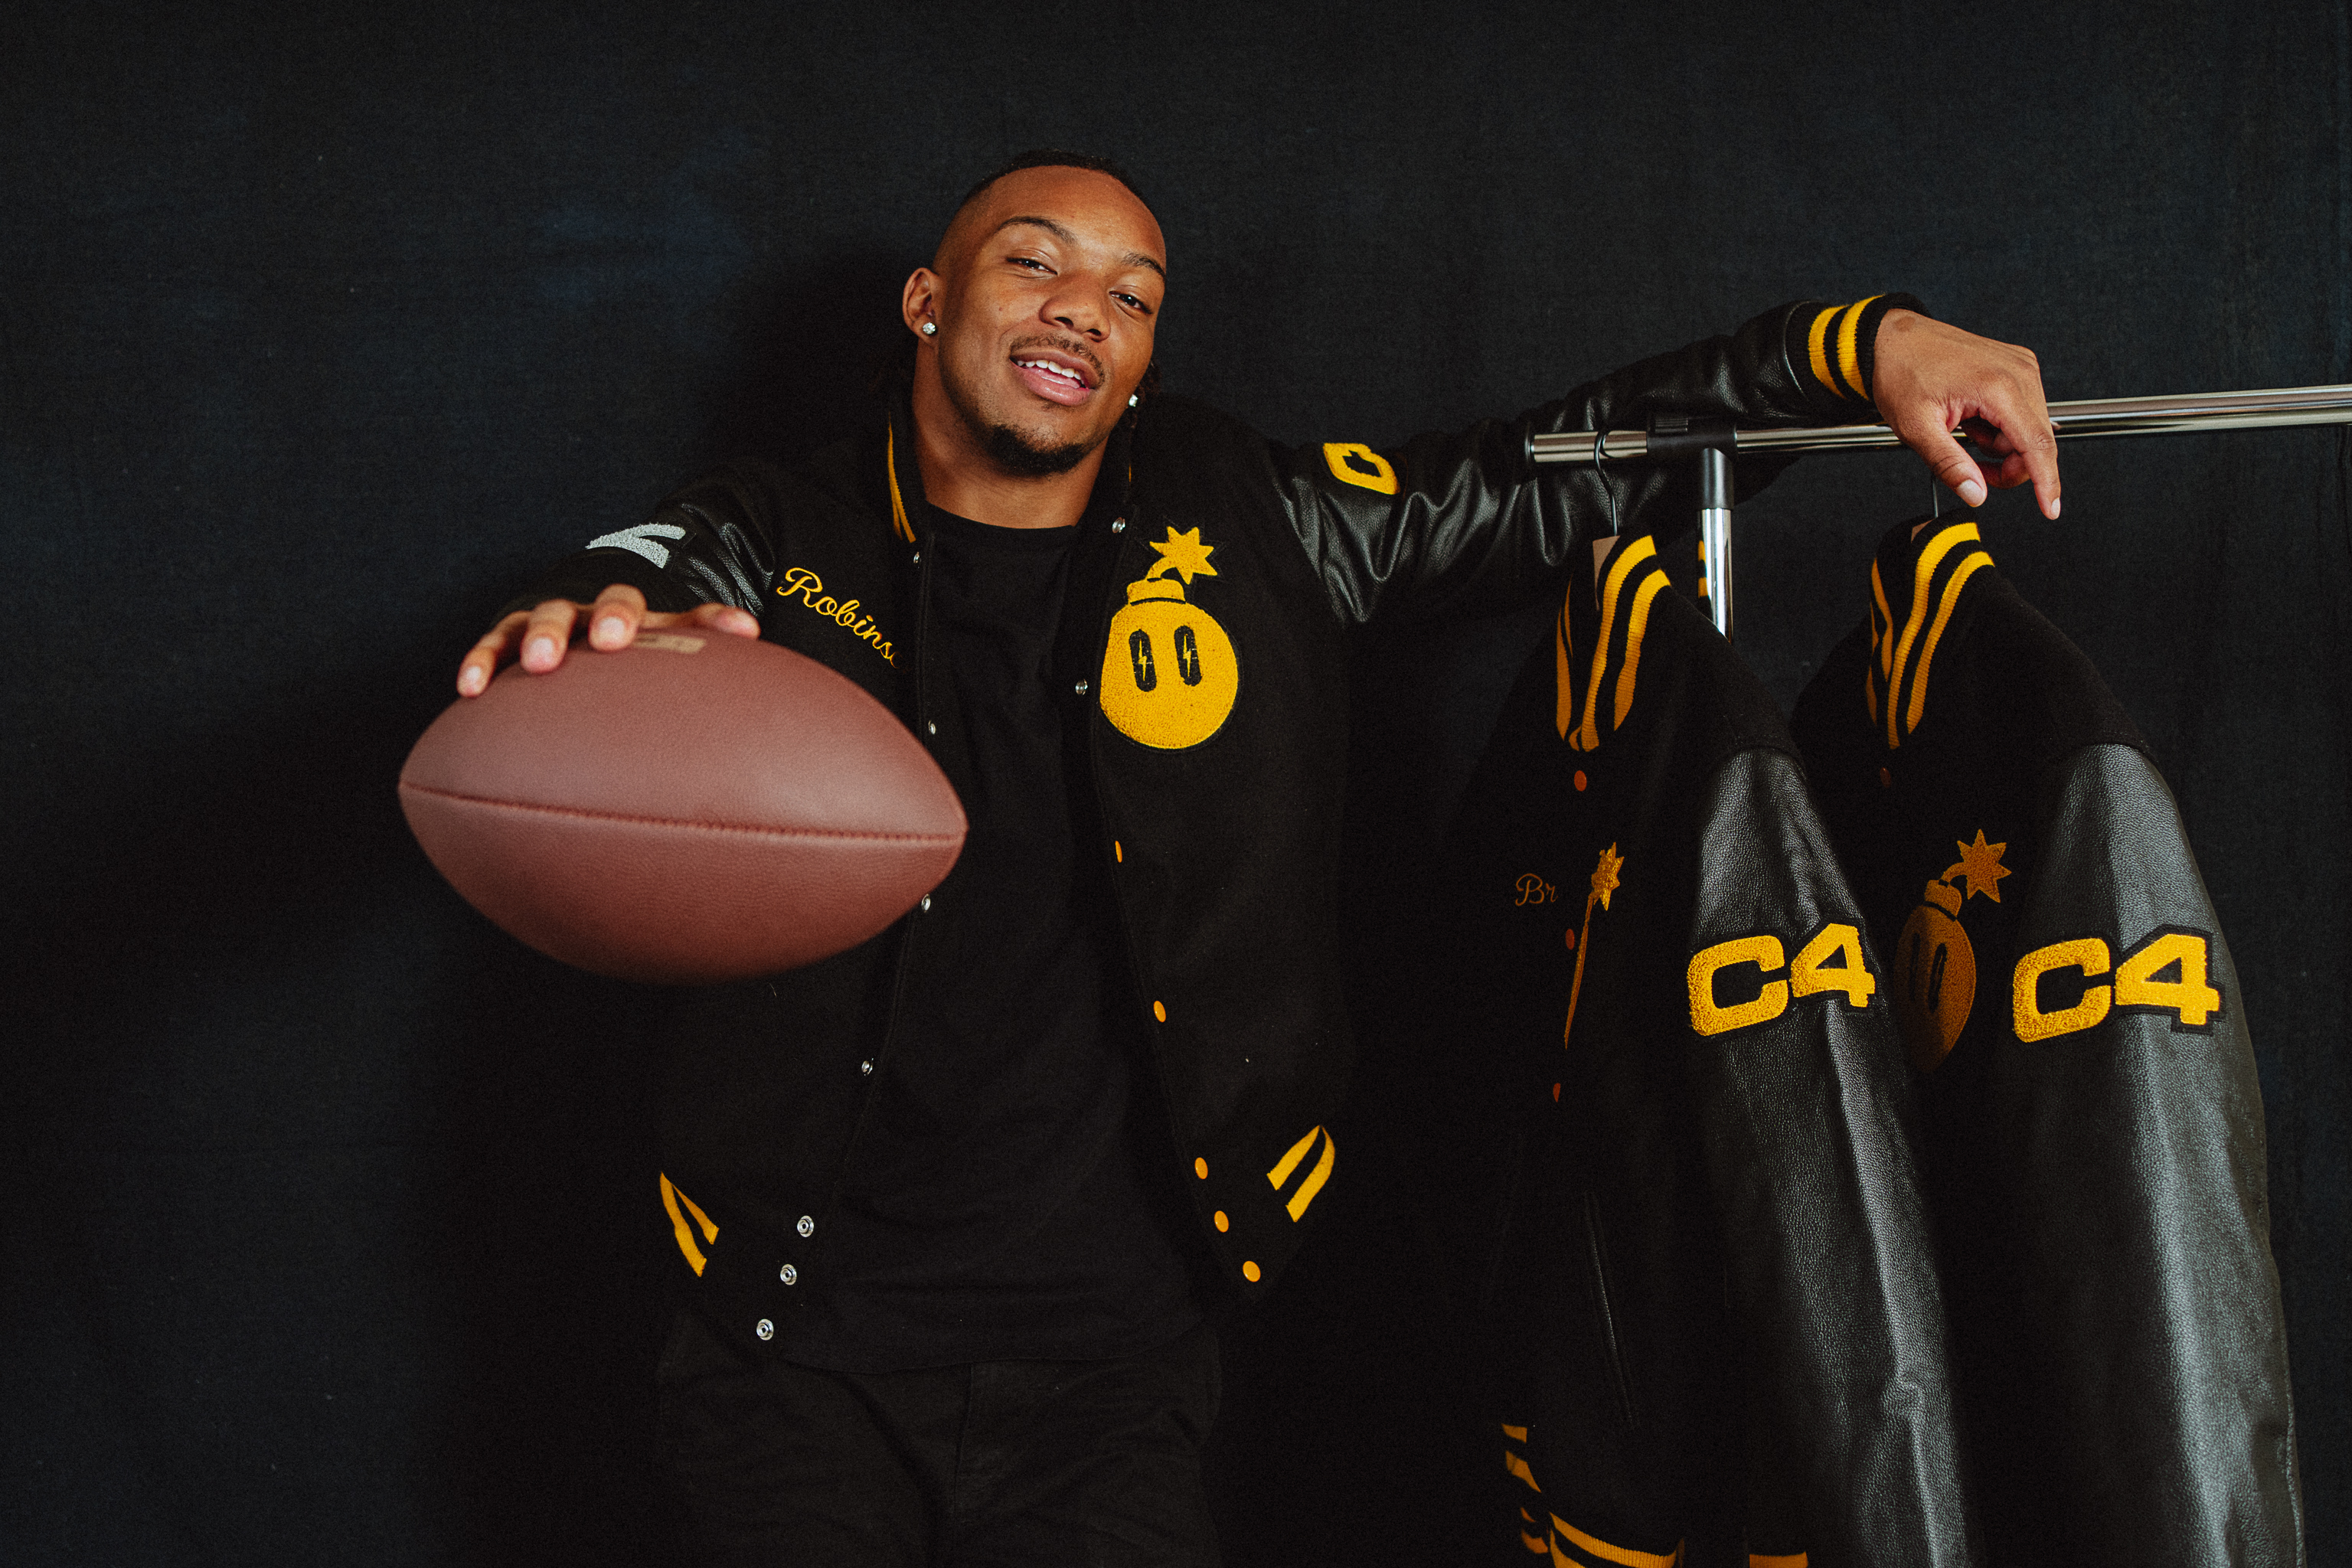 Man posing with football, wearing black and yellow sports jacket with smiley faces, leaning on rack with similar clothing